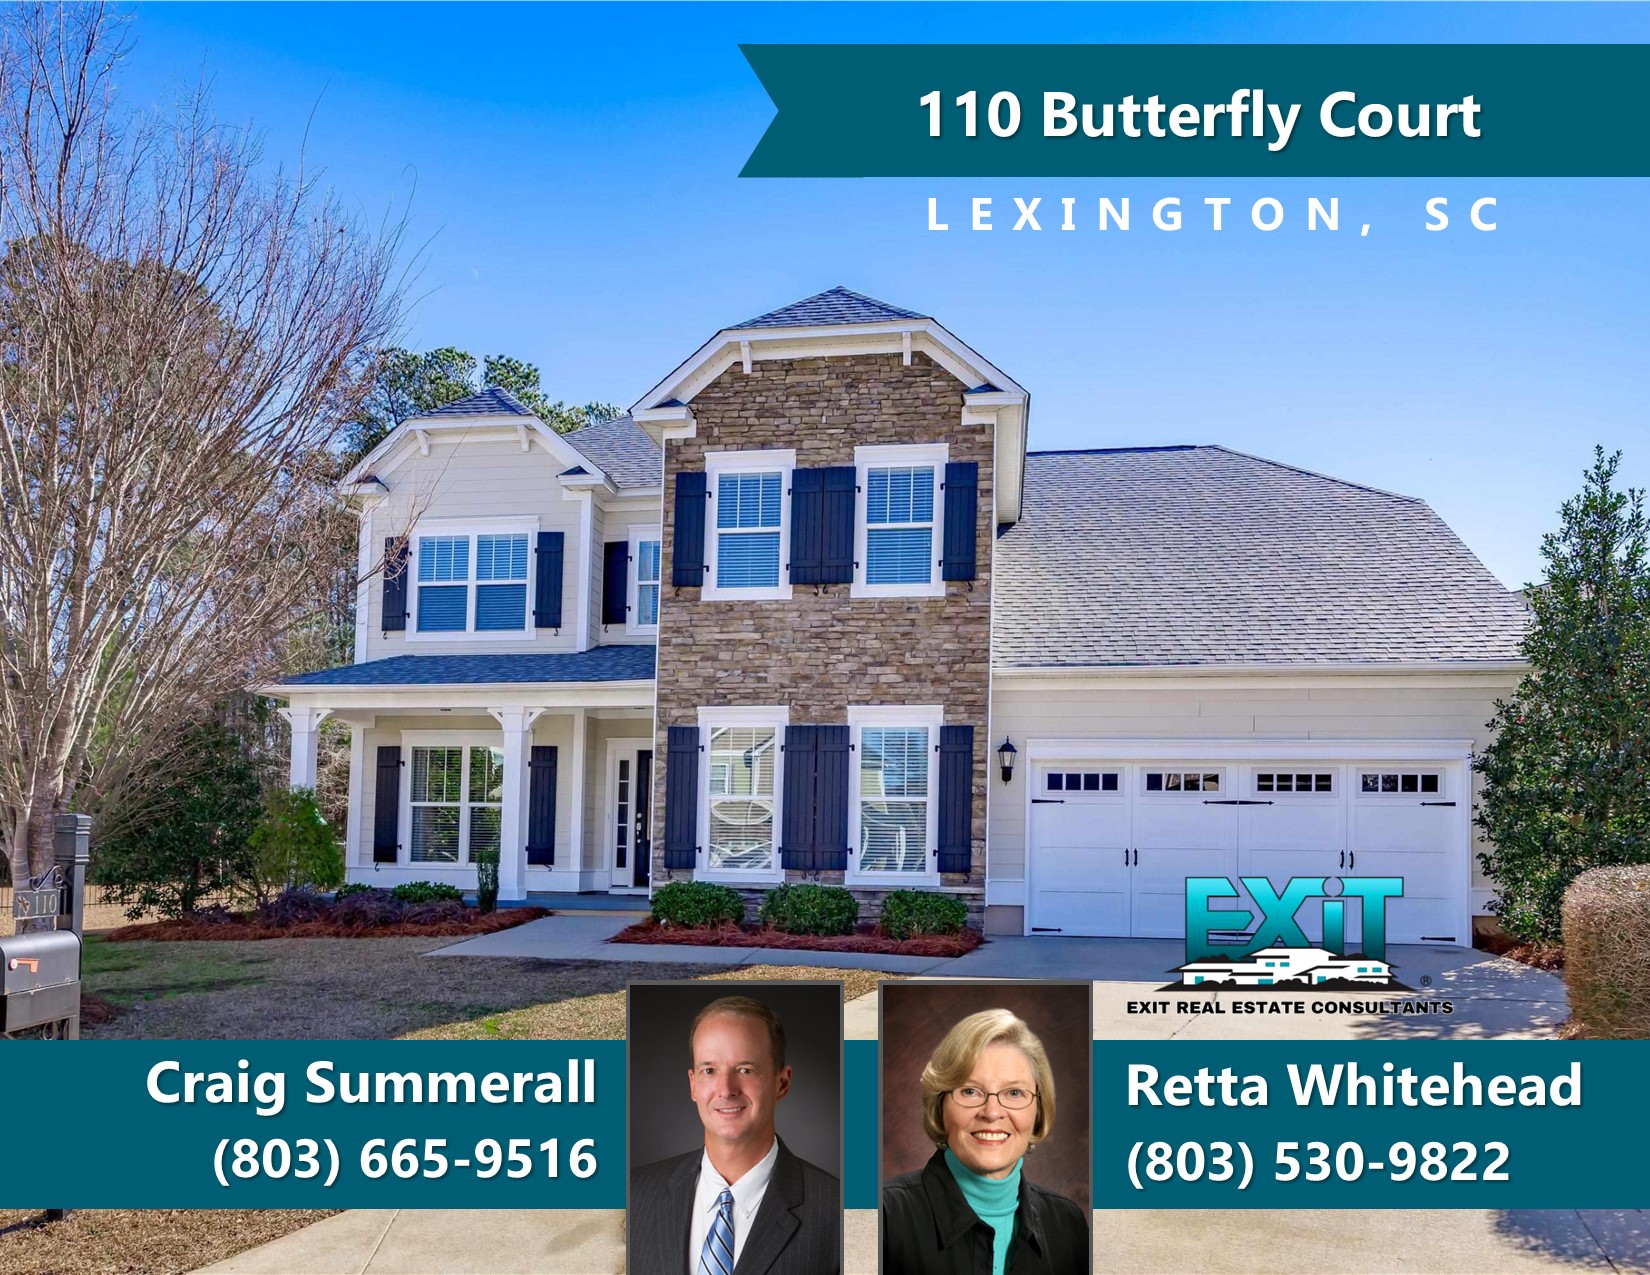 Just listed in Summerlake